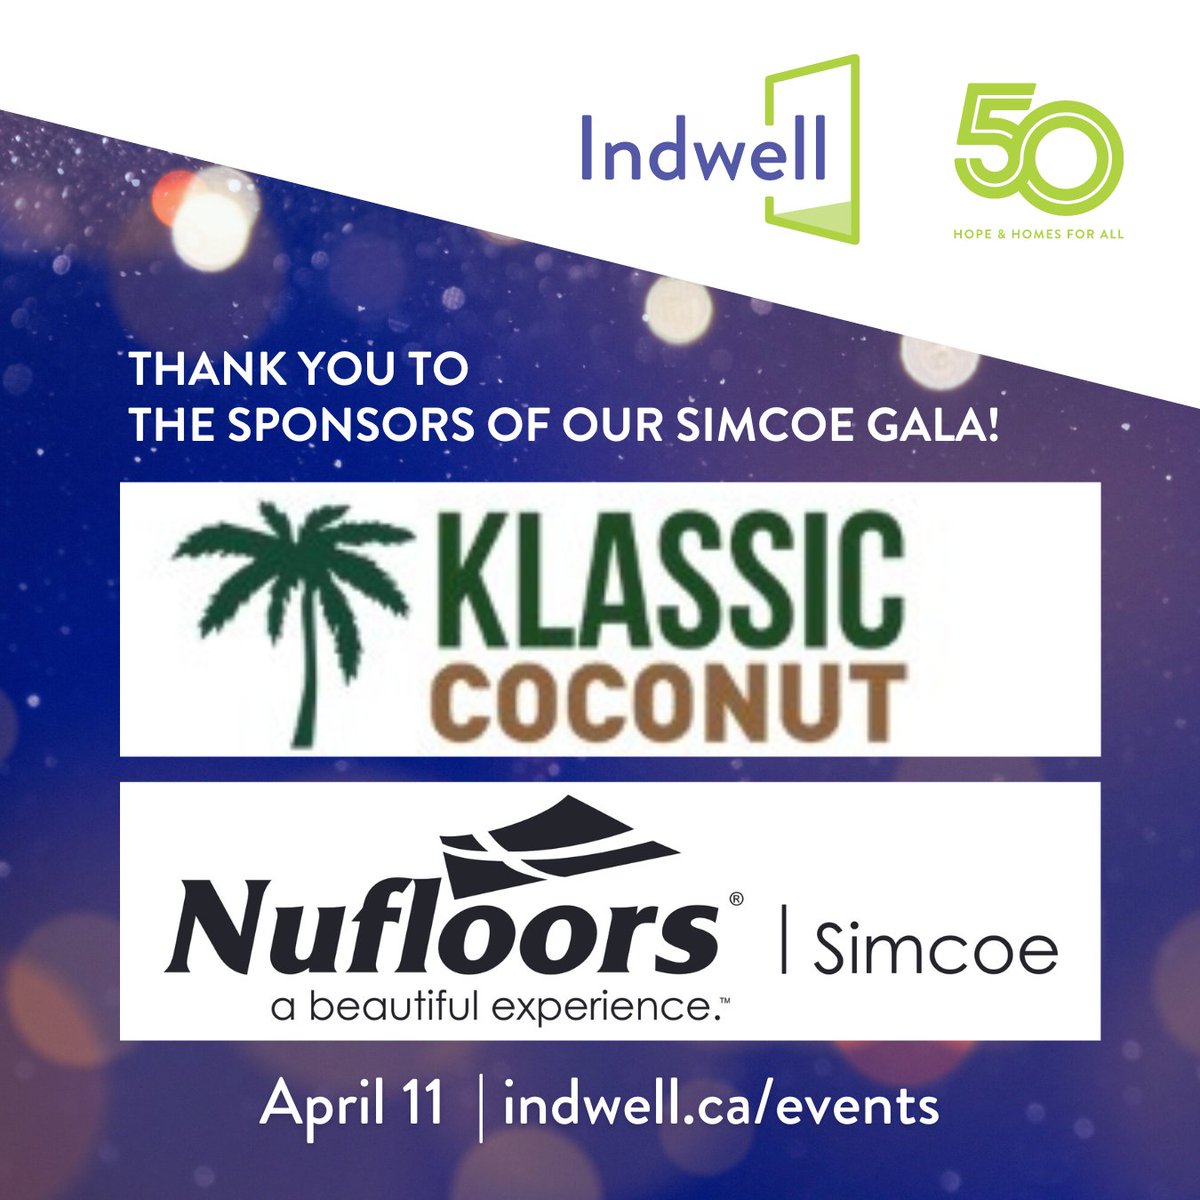 Huge thanks go out to the sponsors of Indwell's 50th Anniversary Celebration in Simcoe: Klassic Coconut and Nufloors. There's still time to get to join us on Thursday, April 11! Register here: loom.ly/mWjmo3s